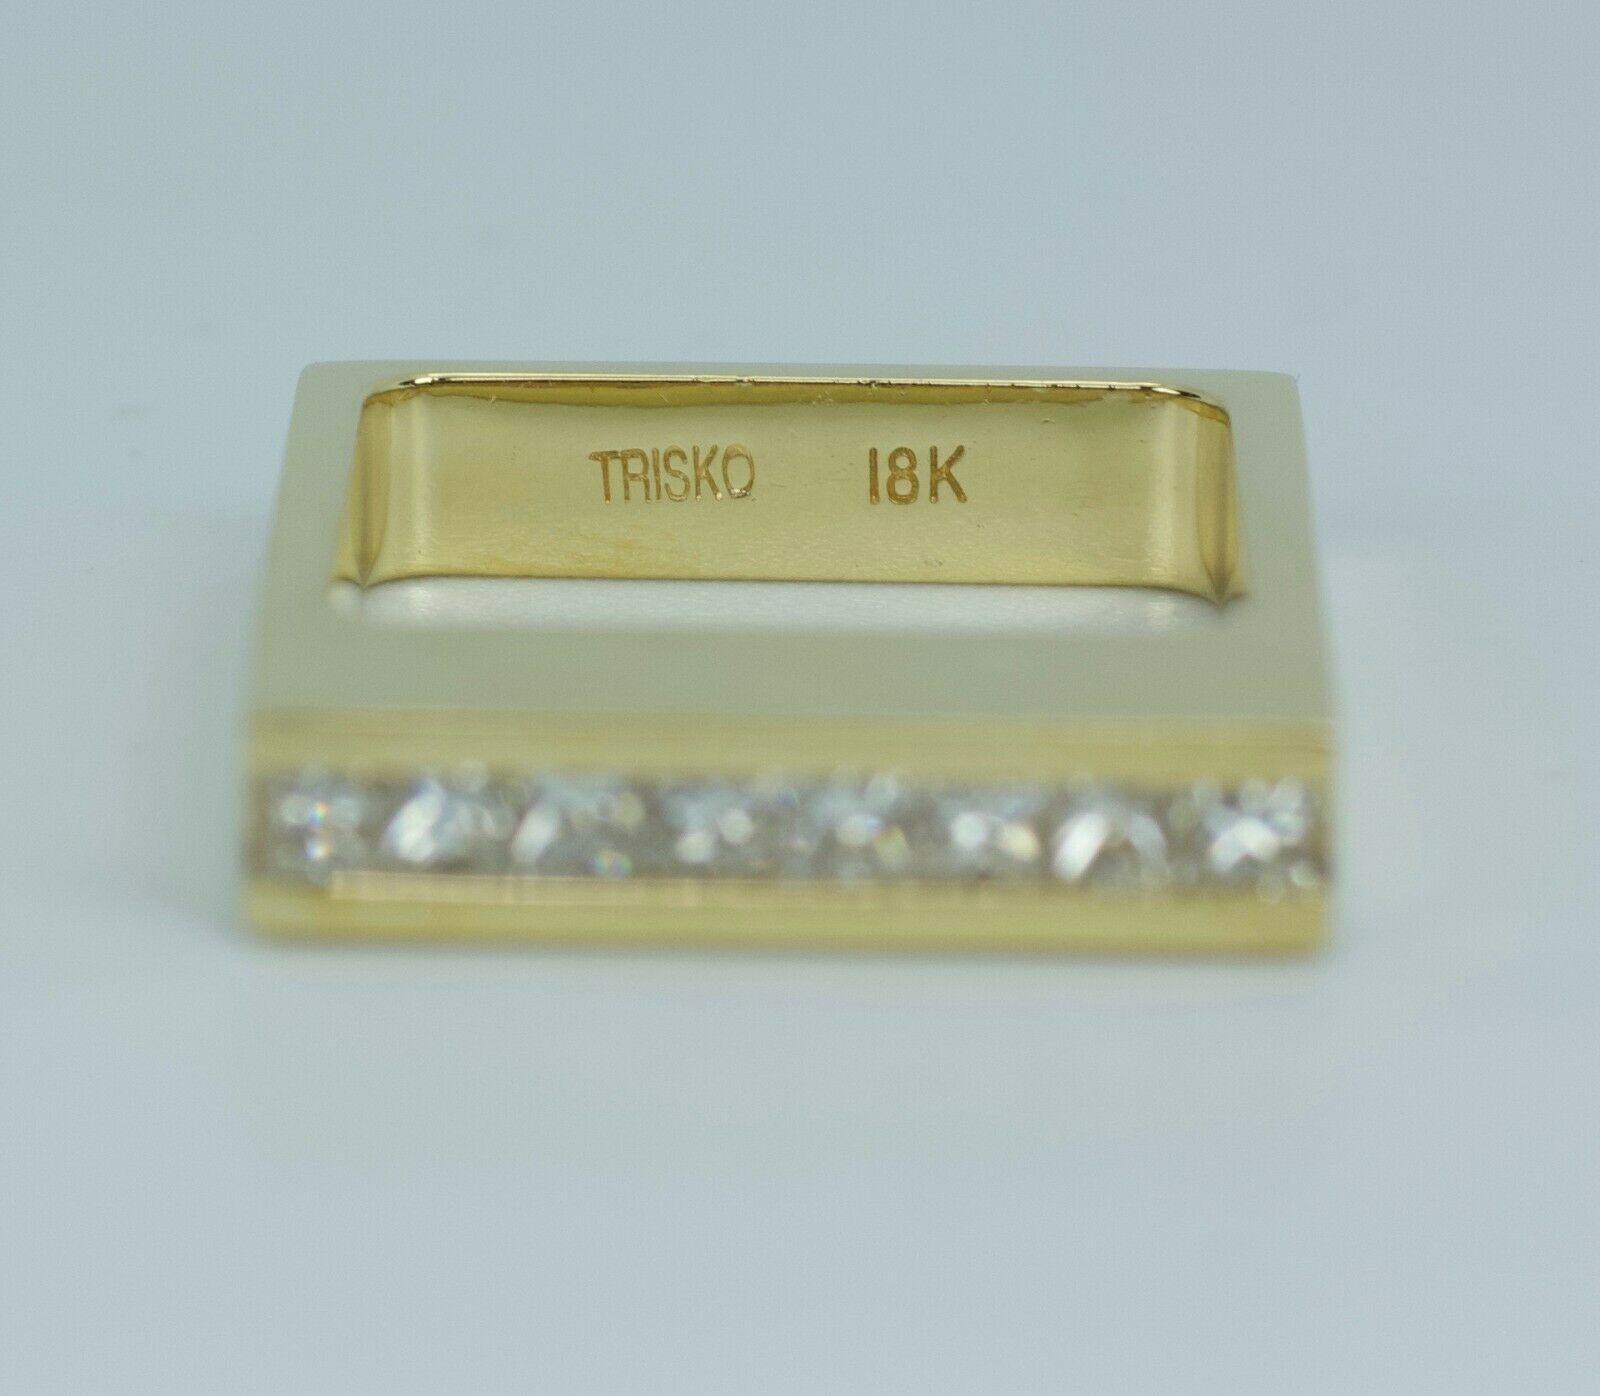 18k Yellow Gold Princess Cut Diamond Stackable band.
11.2 Grams
Ring Size 7.75
8 Princess Cut Diamonds 0.5 Carats Total Weight
Color: I Clarity: Vs2
these beautiful stackable ring are truly one of a kind! I do have the L shape princess cut band as